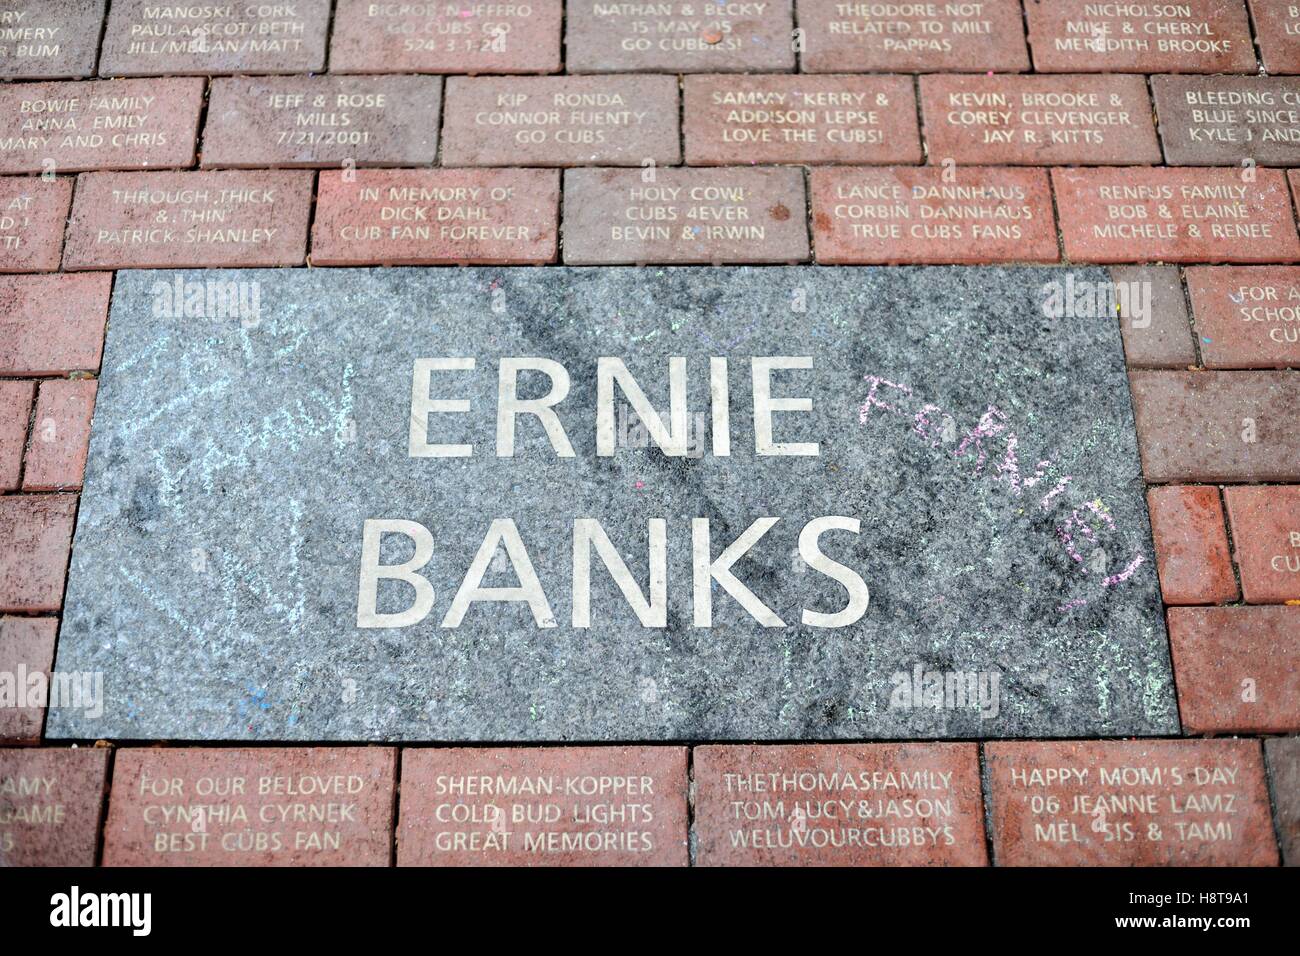 Embedded among a bevy of fan bricks decorated with personal messages is a link to the memory of Mr. Cub, Ernie Banks. Chicago, Illinois, USA. Stock Photo